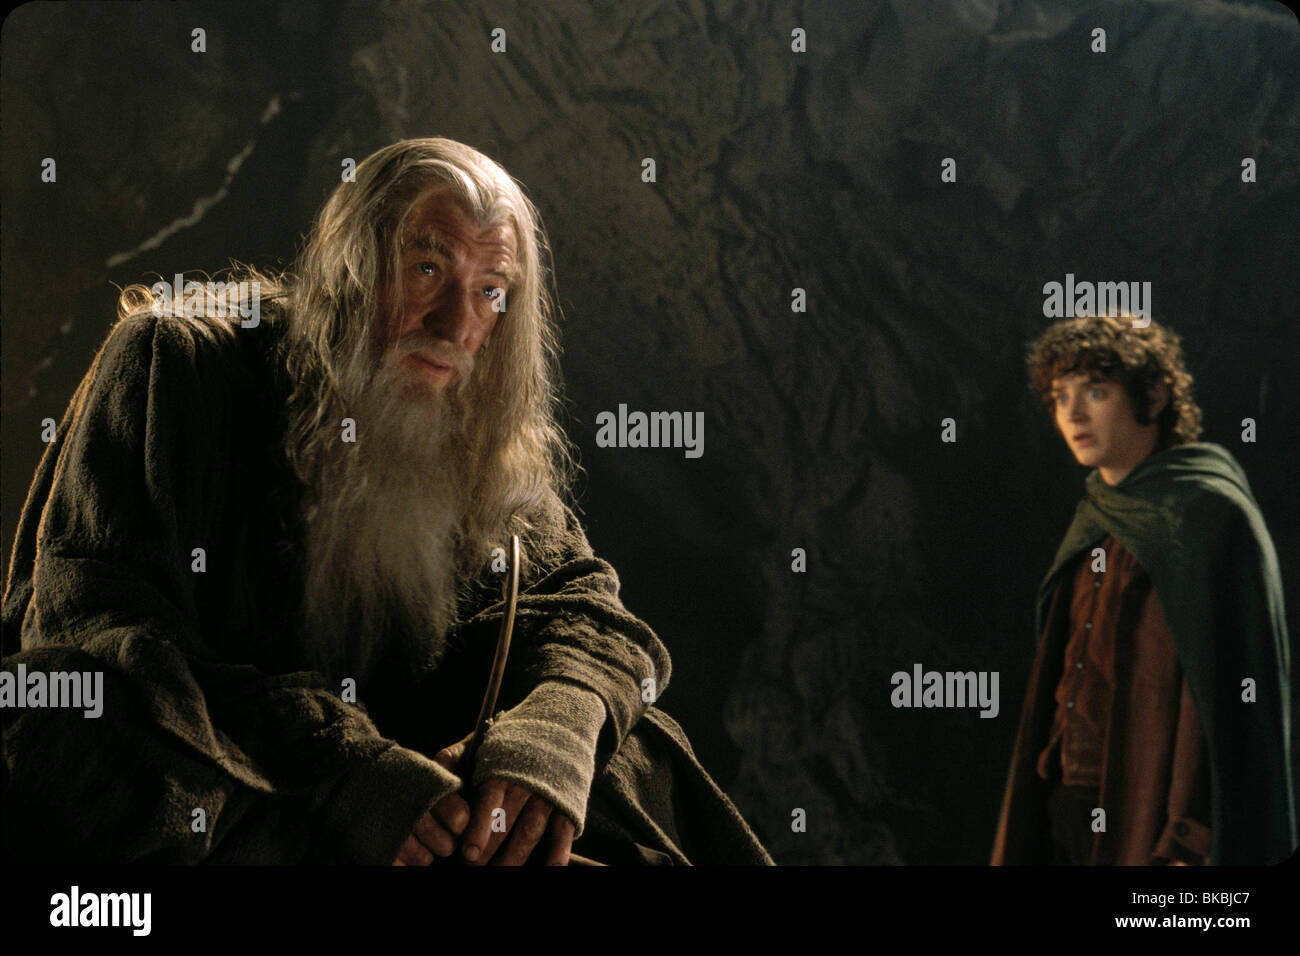 THE LORD OF THE RINGS: THE FELLOWSHIP OF THE RING (2001) IAN MCKELLEN, GANDALF, ELIJAH WOOD, FRODO BAGGINS FOTR 001-27 Stock Photo